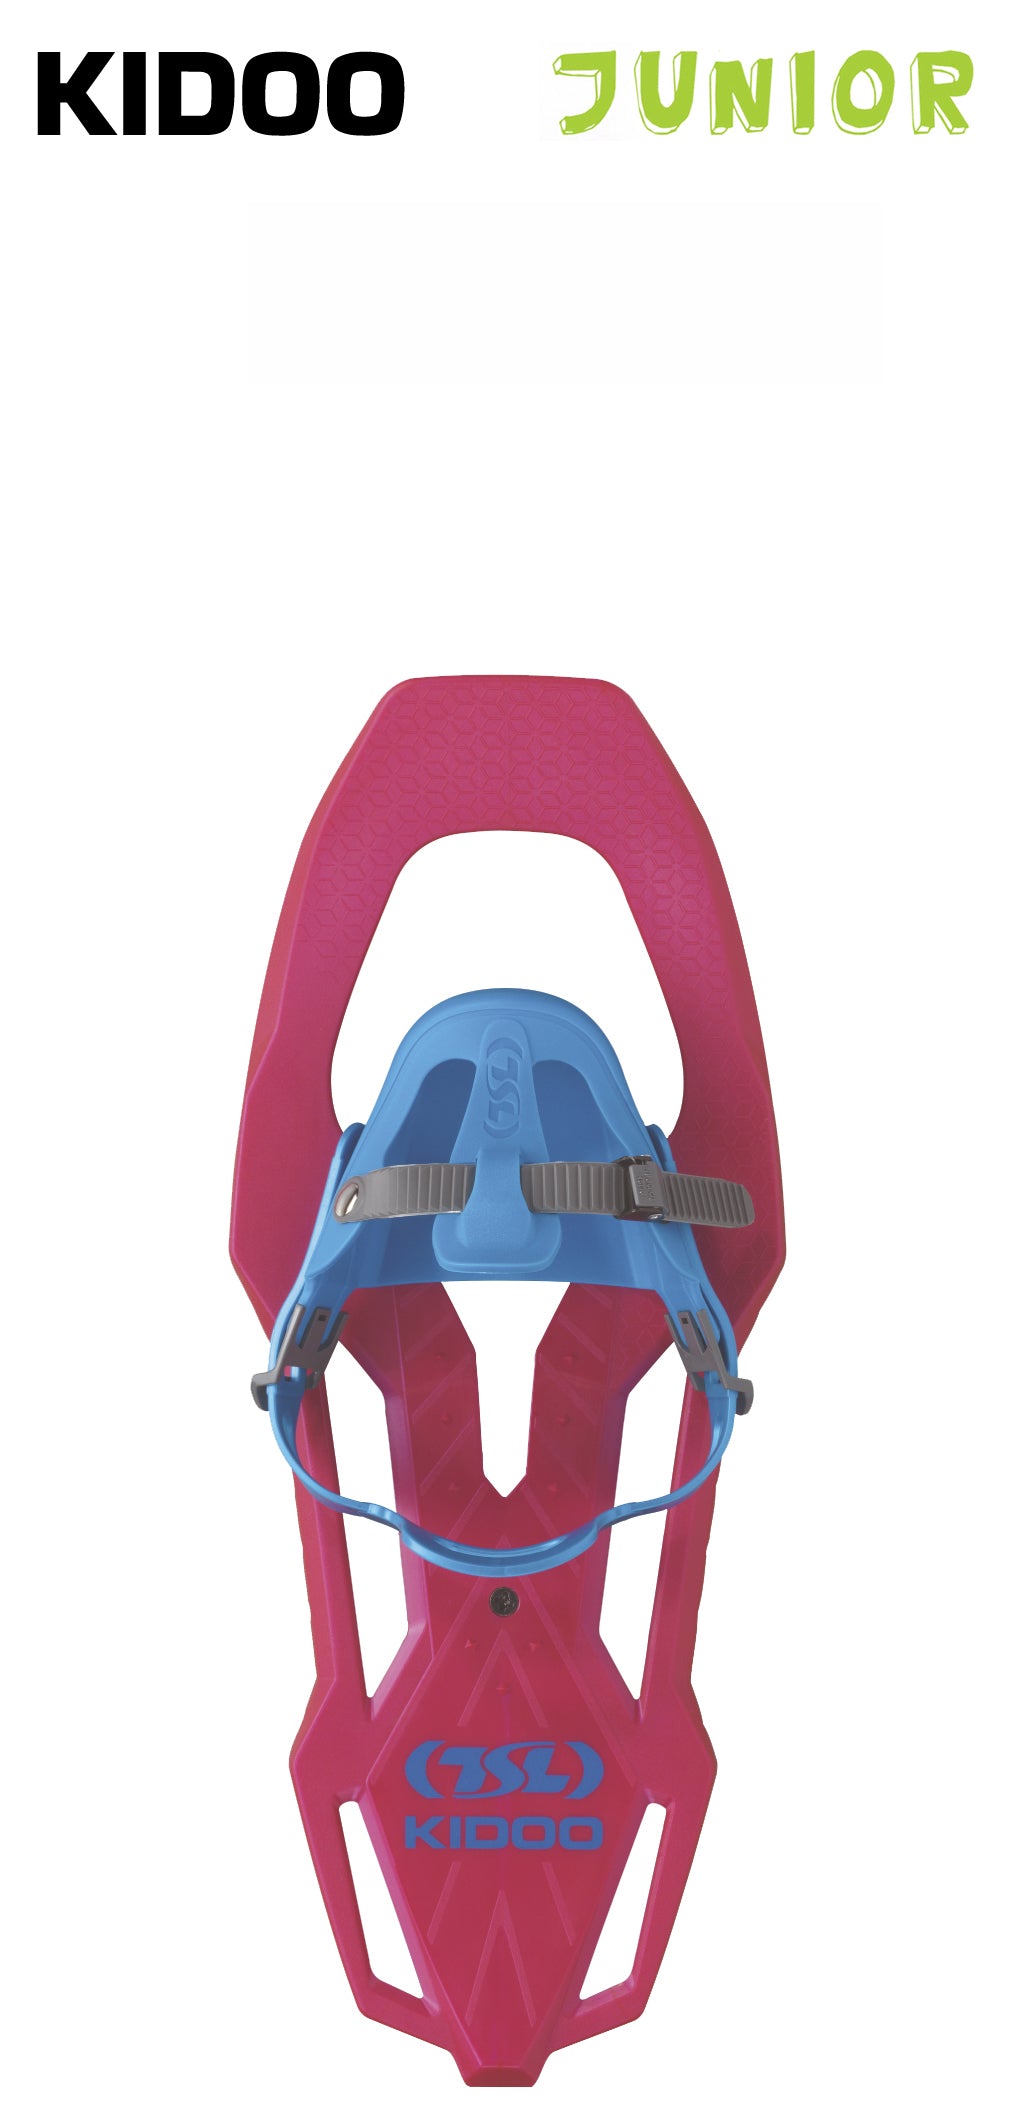 TSL Kidoo Snow Shoes 17-in Color Magenta Youth Kids New Without Bag, Shoe Size Girls 12.5 - 4 Boy, 65LB Max, 30 LB Min